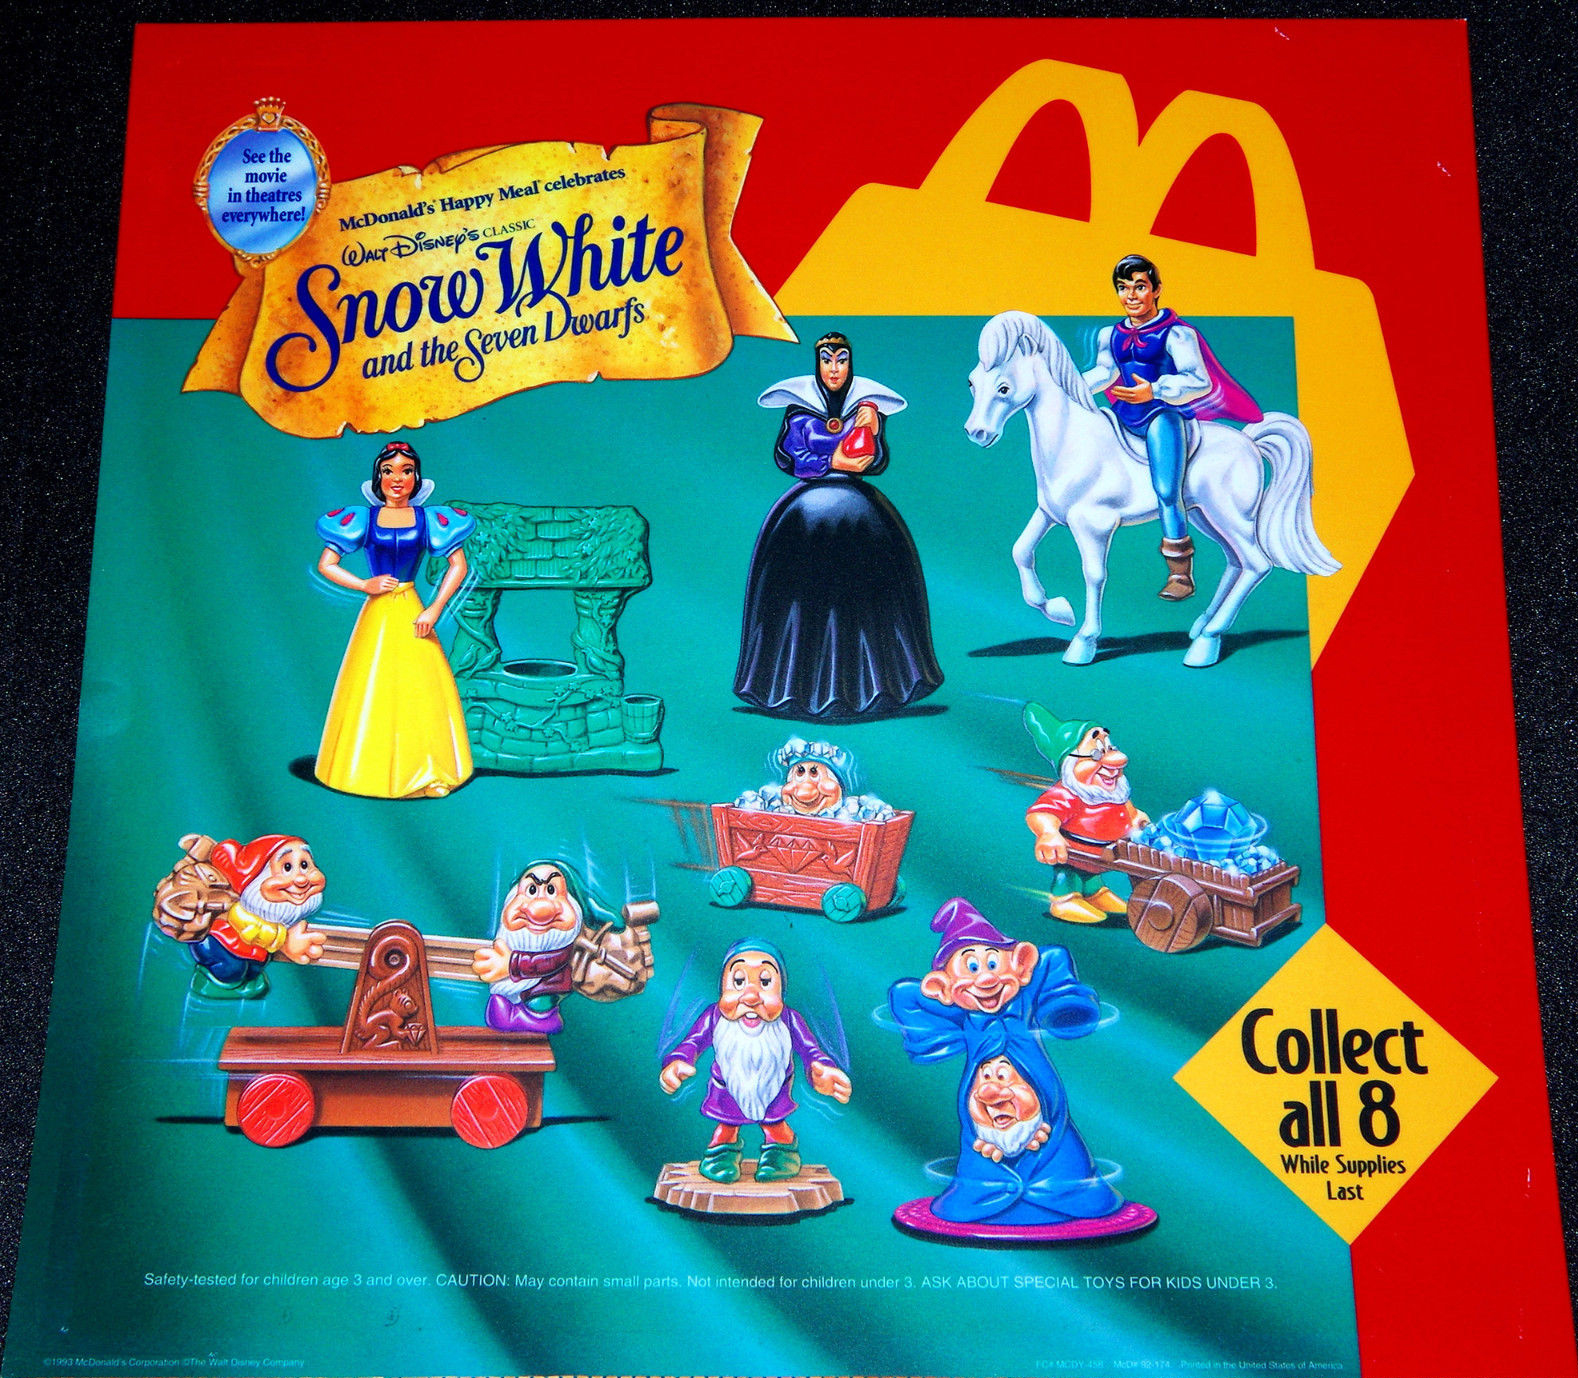 The Queen #3 2001 Snow White McDonalds Happy Meal Toy Clip 